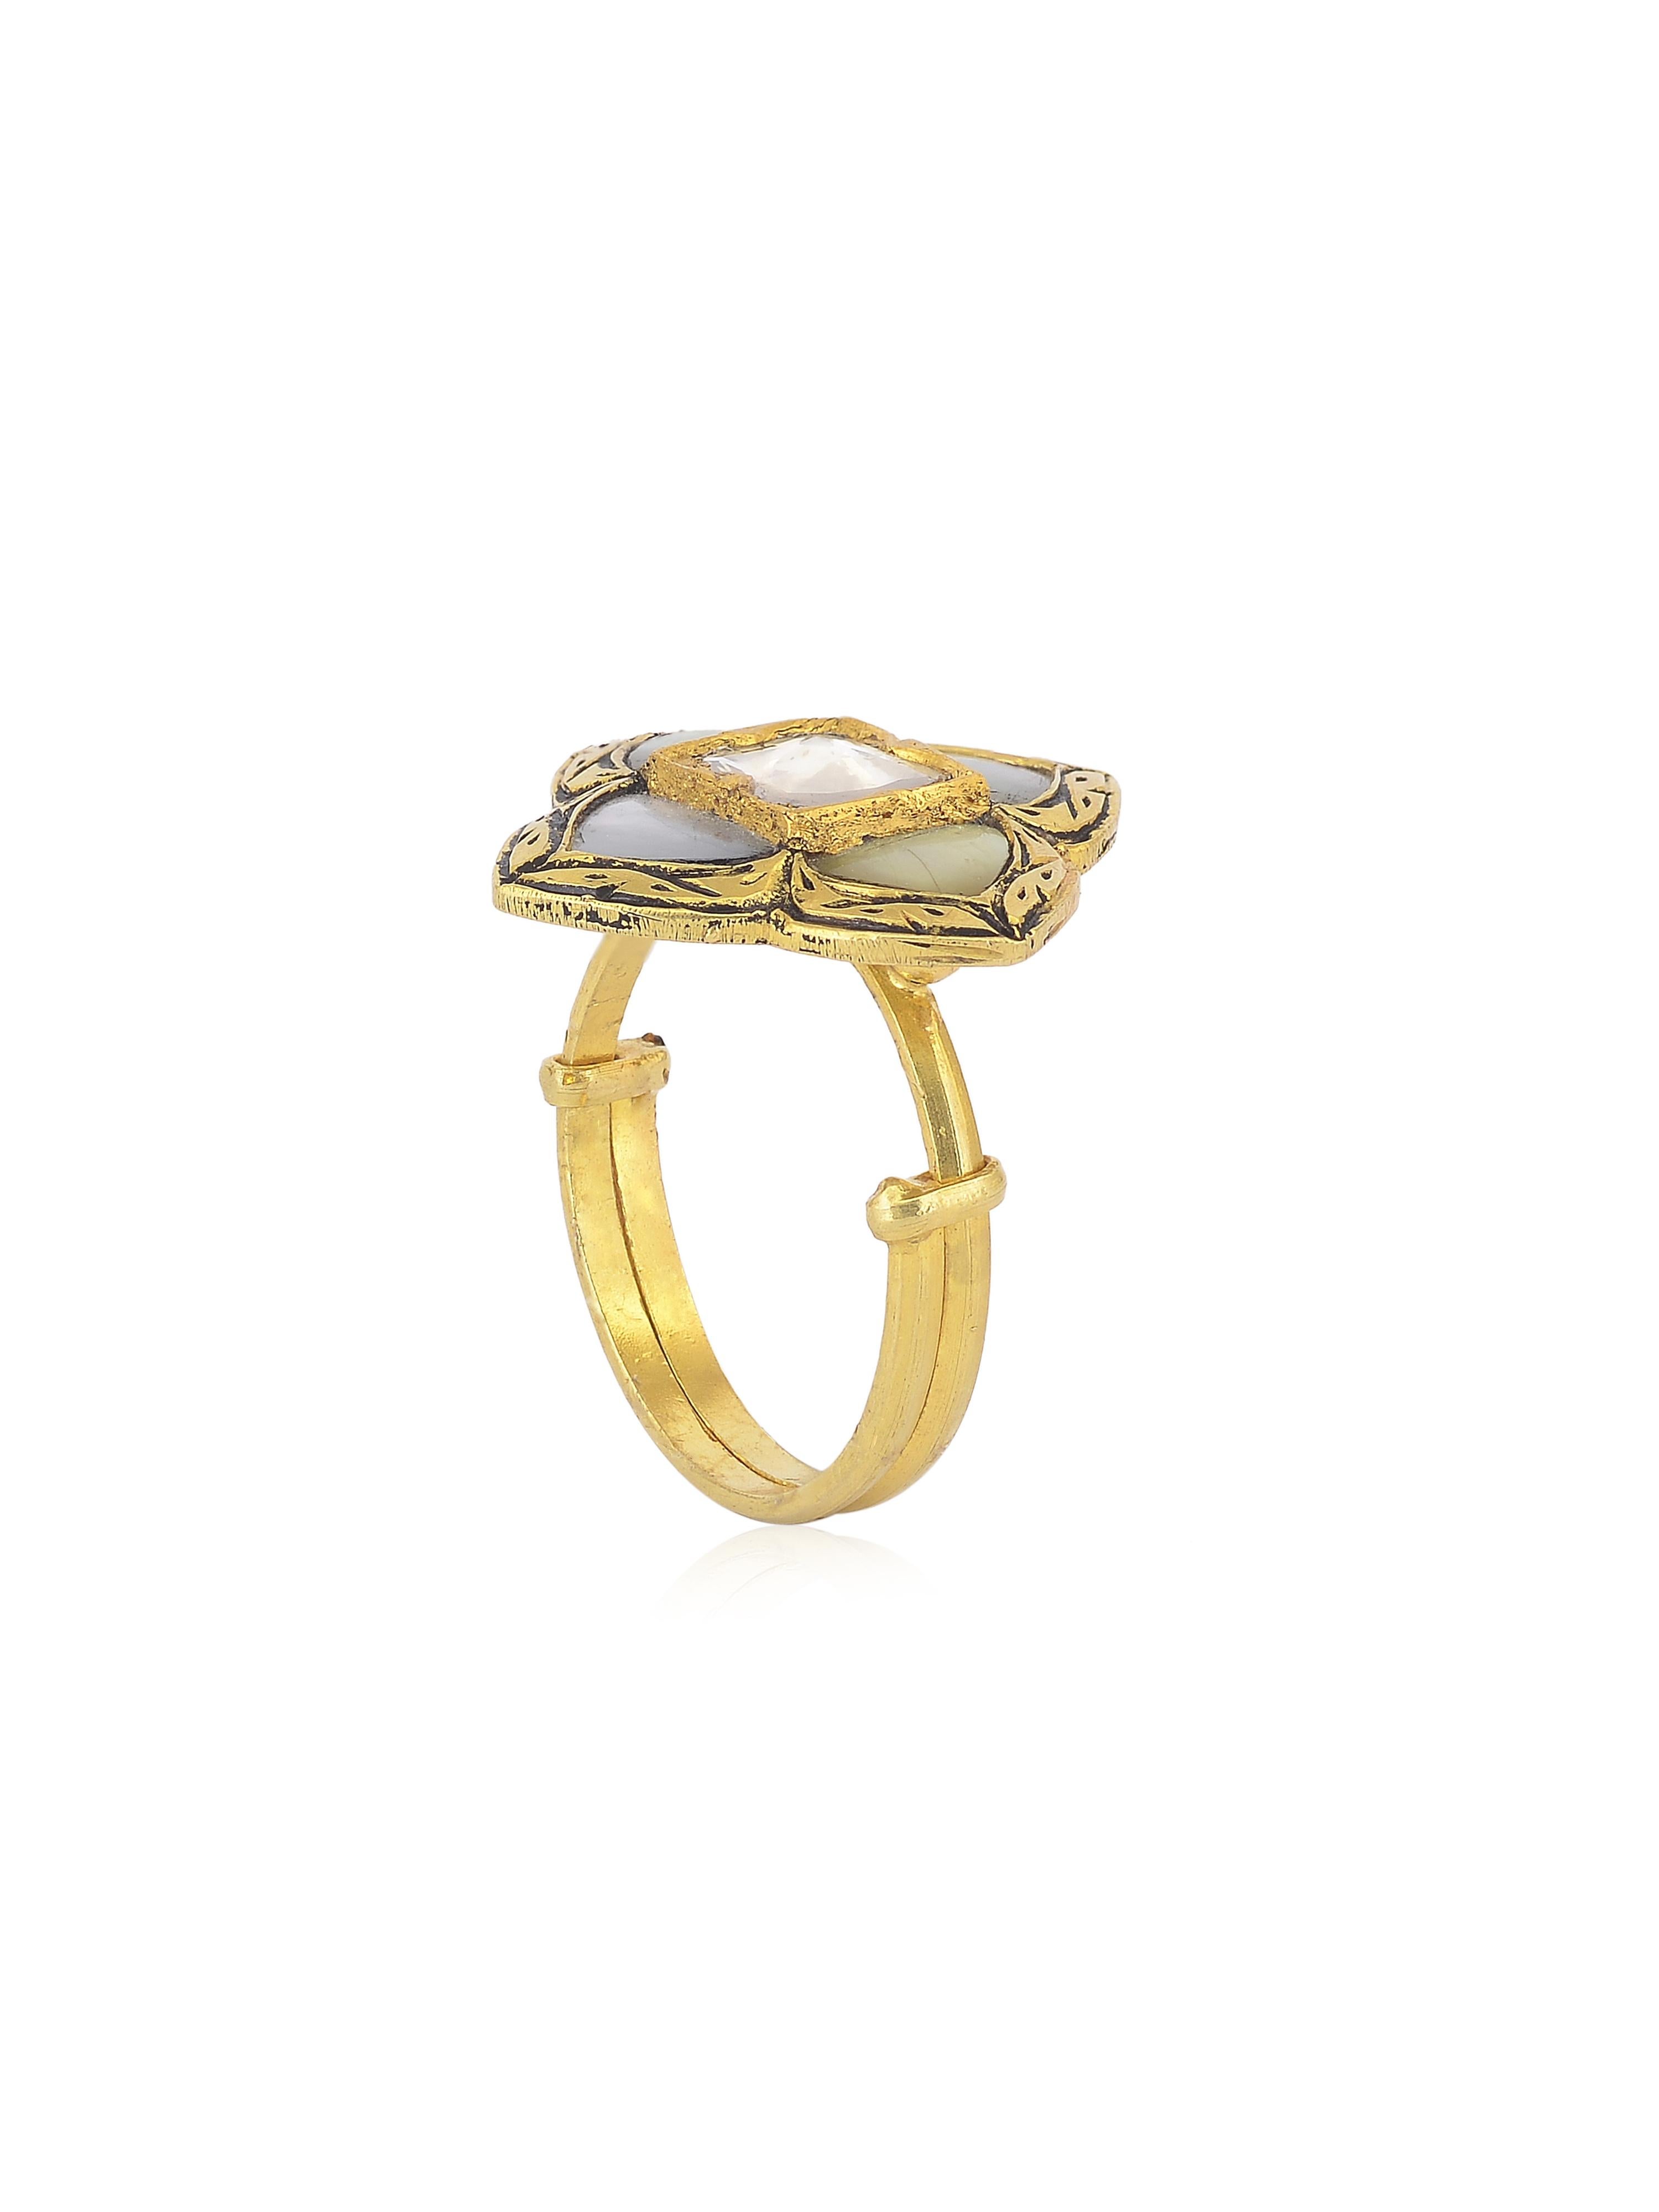 Statement ring with Uncut diamond, Mother of pearl handcrafted in 18k Gold For Sale 1